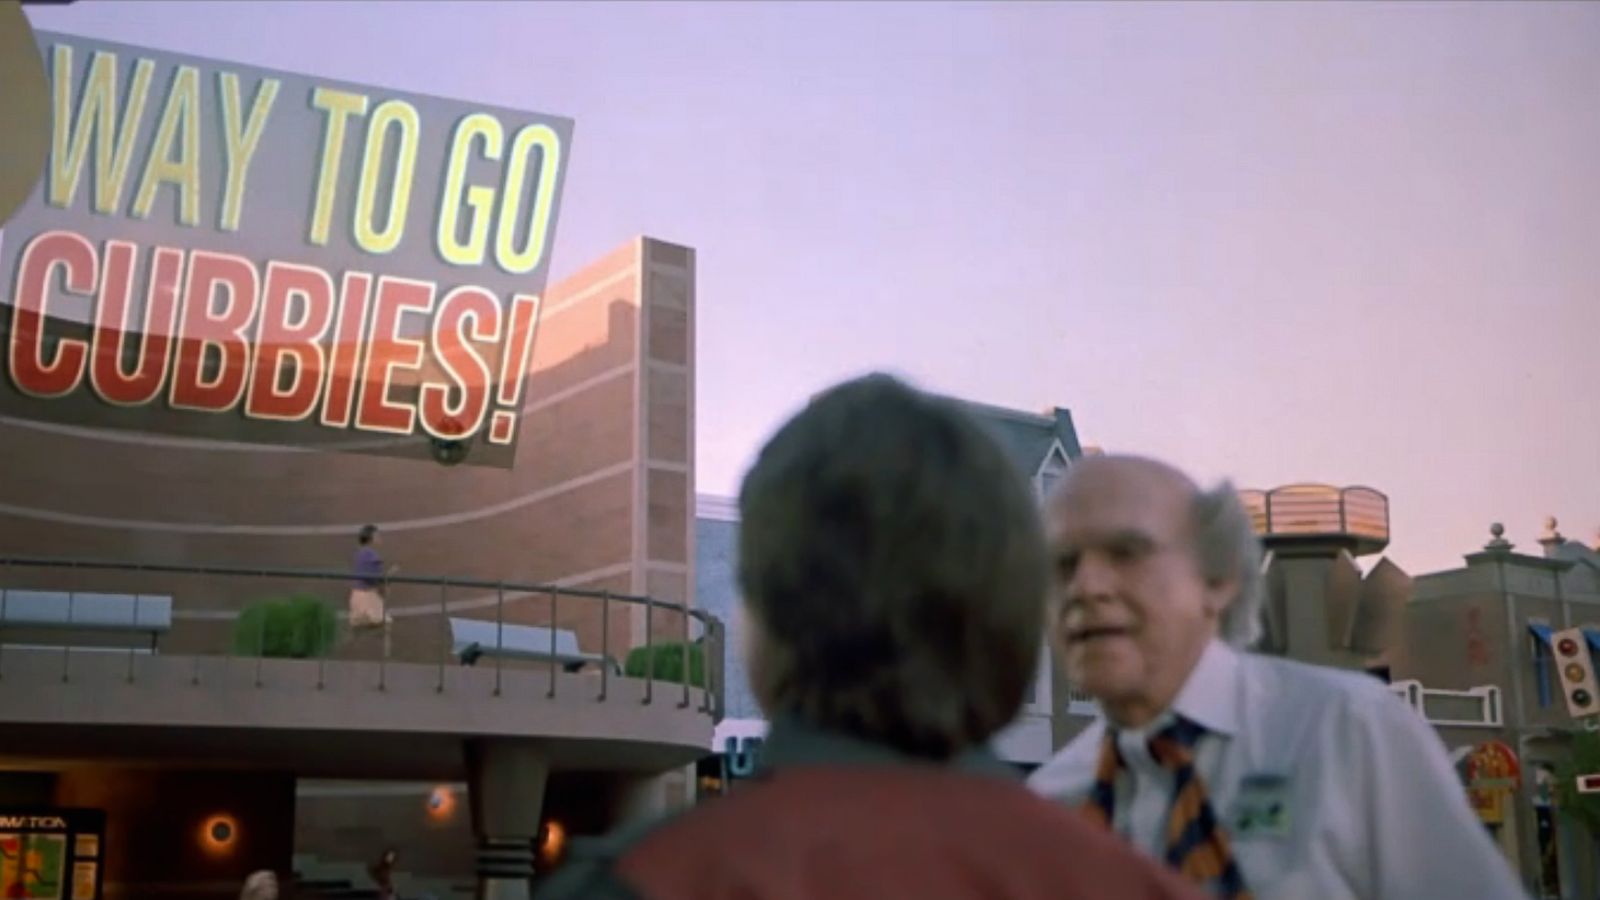 So, 'Back to the Future II' doesn't actually predict the Cubs will win the World  Series